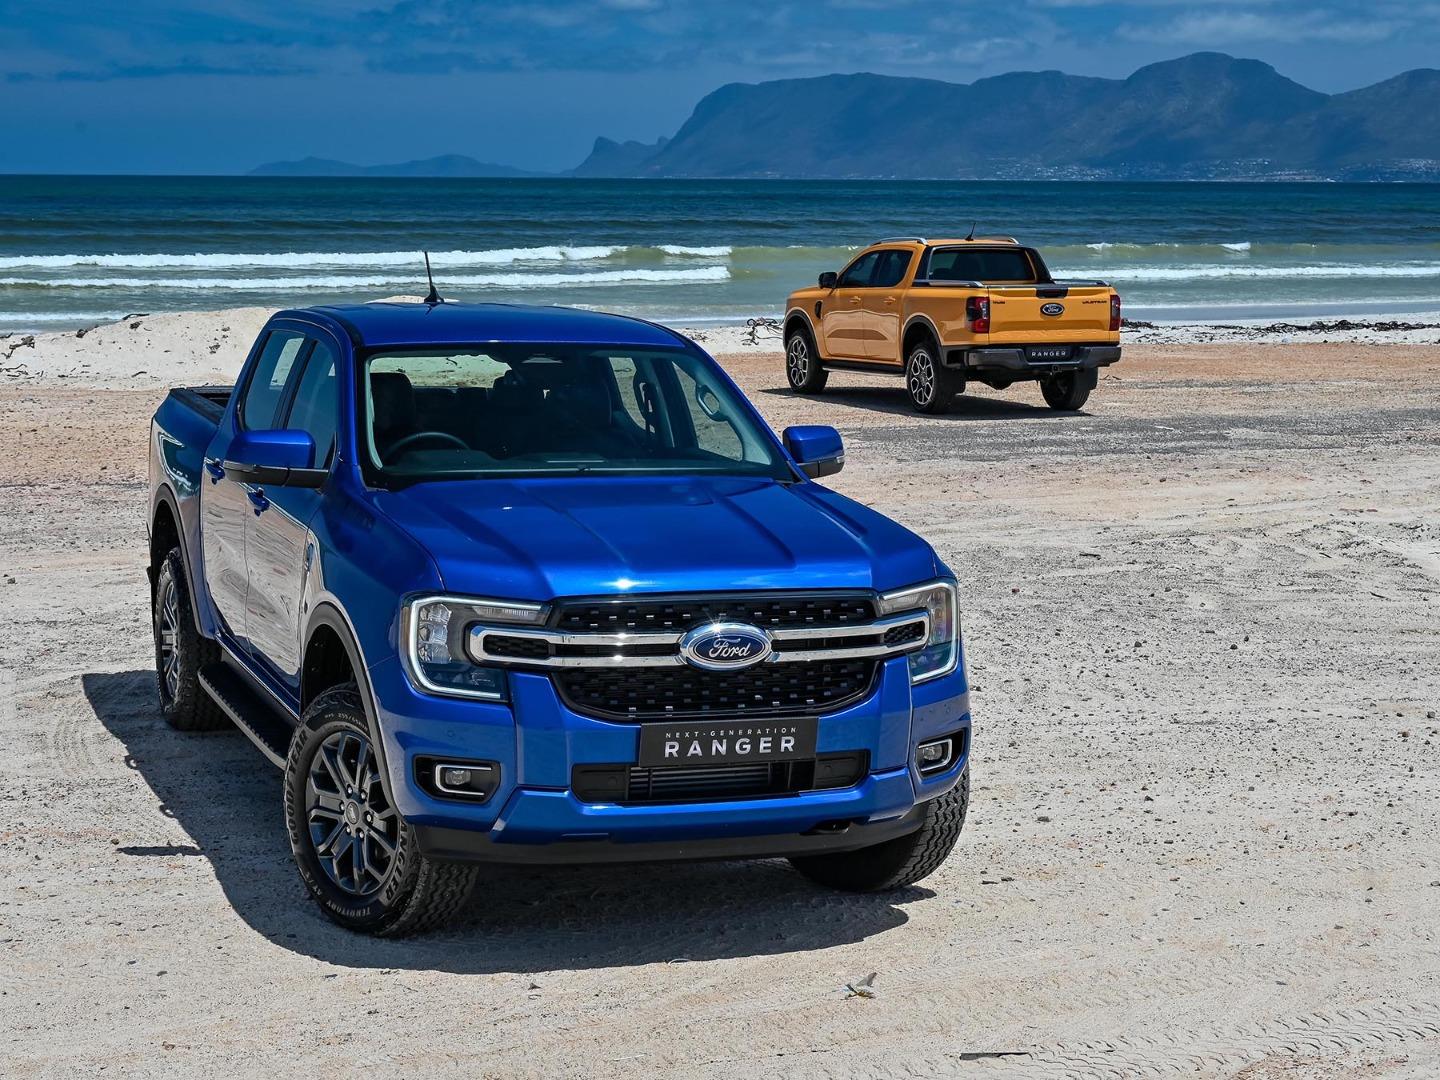 which ford ranger engine is the lightest on fuel?